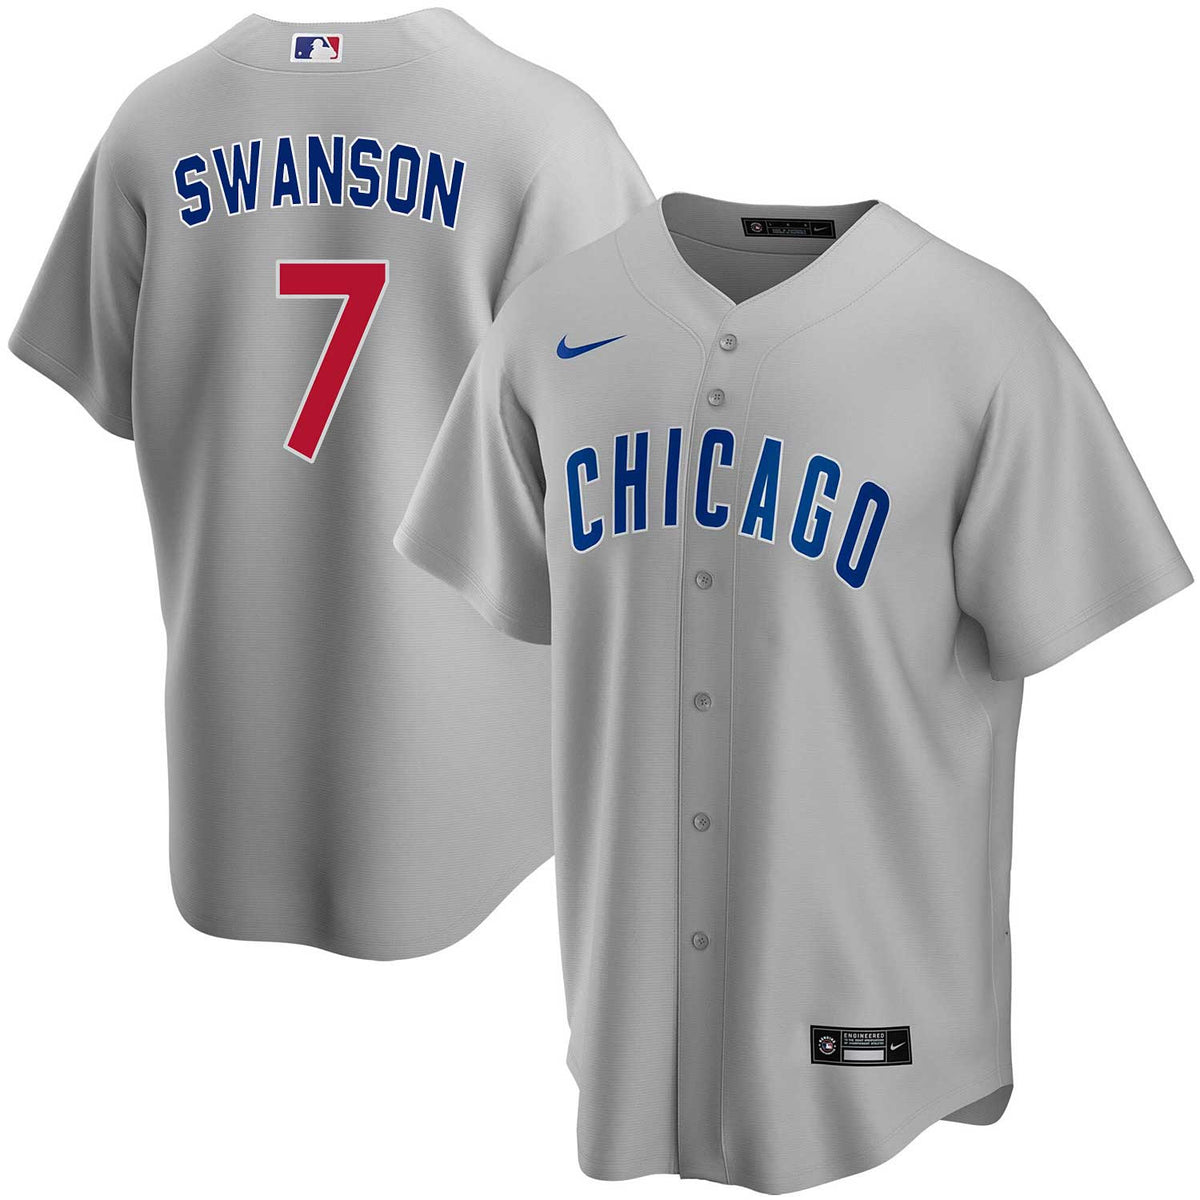 Chicago Cubs Dansby Swanson Nike Home Replica Jersey with Authentic Lettering Large